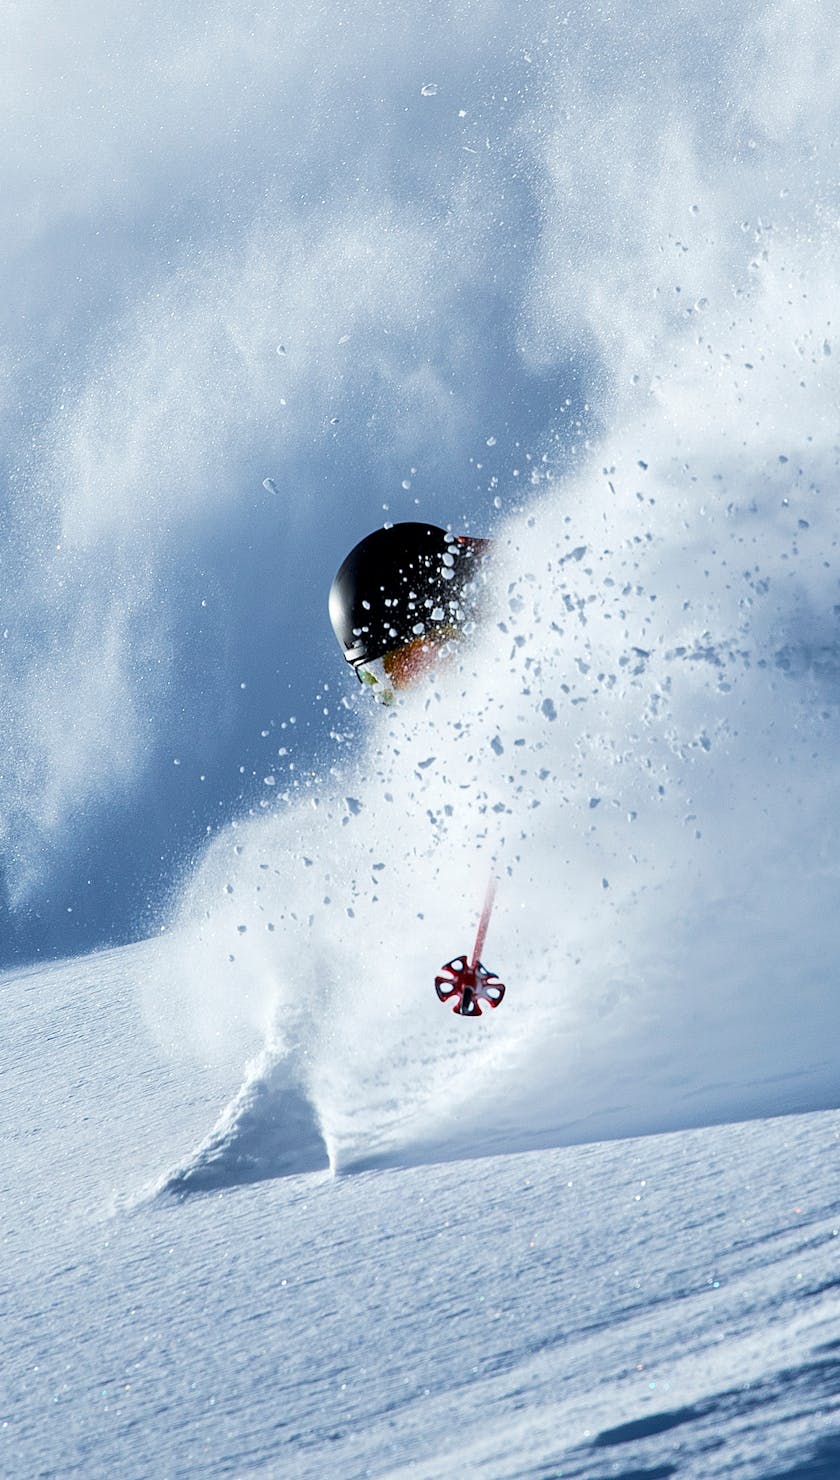 Skier going into a powder turn